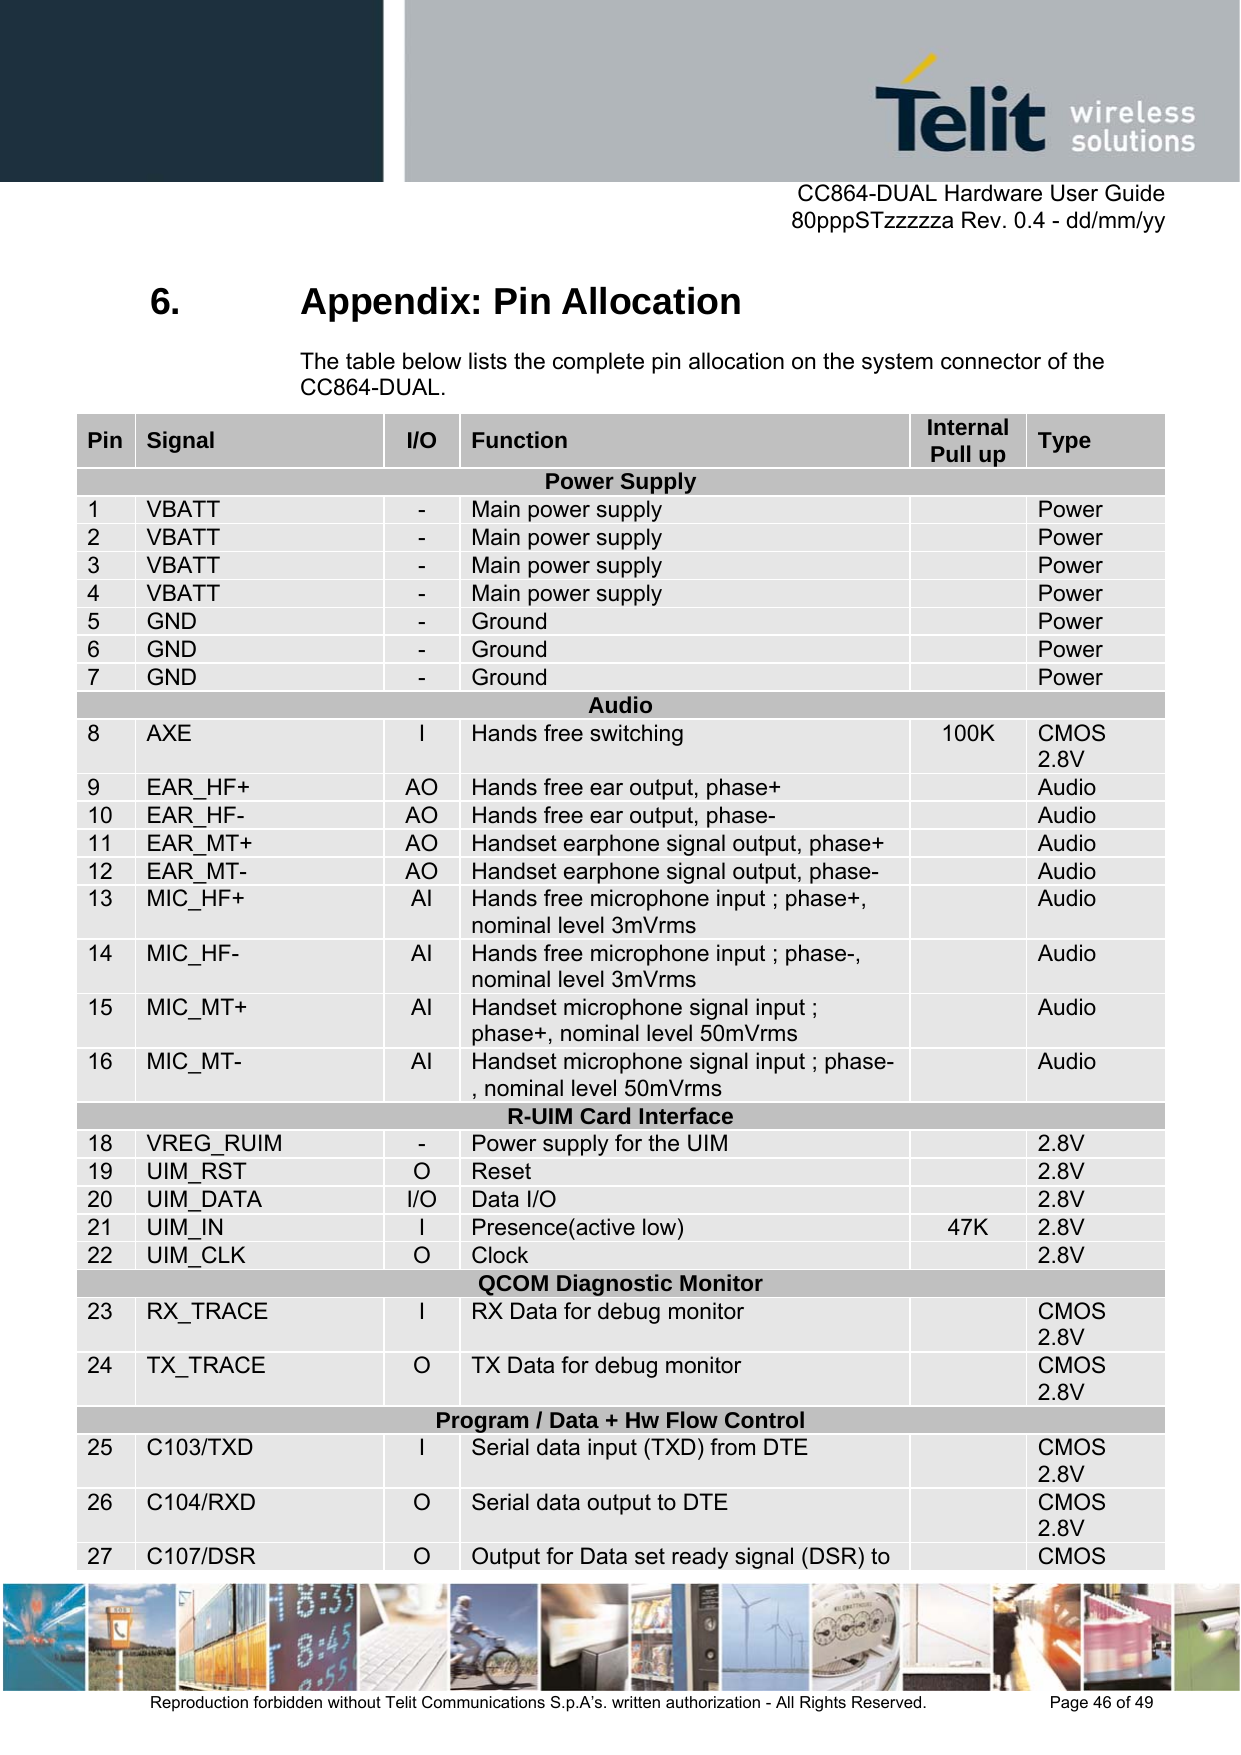      CC864-DUAL Hardware User Guide   80pppSTzzzzza Rev. 0.4 - dd/mm/yy   Reproduction forbidden without Telit Communications S.p.A’s. written authorization - All Rights Reserved.    Page 46 of 49  6. Appendix: Pin Allocation The table below lists the complete pin allocation on the system connector of the CC864-DUAL. Pin  Signal  I/O  Function  Internal Pull up  Type Power Supply 1  VBATT  -  Main power supply   Power 2  VBATT  -  Main power supply   Power 3  VBATT  -  Main power supply   Power 4  VBATT  -  Main power supply   Power 5  GND  -  Ground   Power 6  GND  -  Ground   Power 7  GND  -  Ground   Power Audio 8  AXE  I  Hands free switching  100K  CMOS 2.8V 9  EAR_HF+  AO  Hands free ear output, phase+   Audio 10  EAR_HF-  AO  Hands free ear output, phase-   Audio 11  EAR_MT+  AO  Handset earphone signal output, phase+   Audio 12  EAR_MT-  AO  Handset earphone signal output, phase-   Audio 13  MIC_HF+  AI  Hands free microphone input ; phase+, nominal level 3mVrms  Audio 14  MIC_HF-  AI  Hands free microphone input ; phase-, nominal level 3mVrms  Audio 15  MIC_MT+  AI  Handset microphone signal input ; phase+, nominal level 50mVrms  Audio 16  MIC_MT-  AI  Handset microphone signal input ; phase-, nominal level 50mVrms  Audio R-UIM Card Interface 18  VREG_RUIM  -  Power supply for the UIM   2.8V 19  UIM_RST  O  Reset   2.8V 20  UIM_DATA  I/O  Data I/O   2.8V 21  UIM_IN  I  Presence(active low)  47K  2.8V 22  UIM_CLK  O  Clock   2.8V QCOM Diagnostic Monitor 23  RX_TRACE  I  RX Data for debug monitor    CMOS 2.8V 24  TX_TRACE  O  TX Data for debug monitor    CMOS 2.8V Program / Data + Hw Flow Control 25  C103/TXD  I  Serial data input (TXD) from DTE    CMOS 2.8V 26  C104/RXD  O  Serial data output to DTE    CMOS 2.8V 27  C107/DSR  O  Output for Data set ready signal (DSR) to    CMOS 